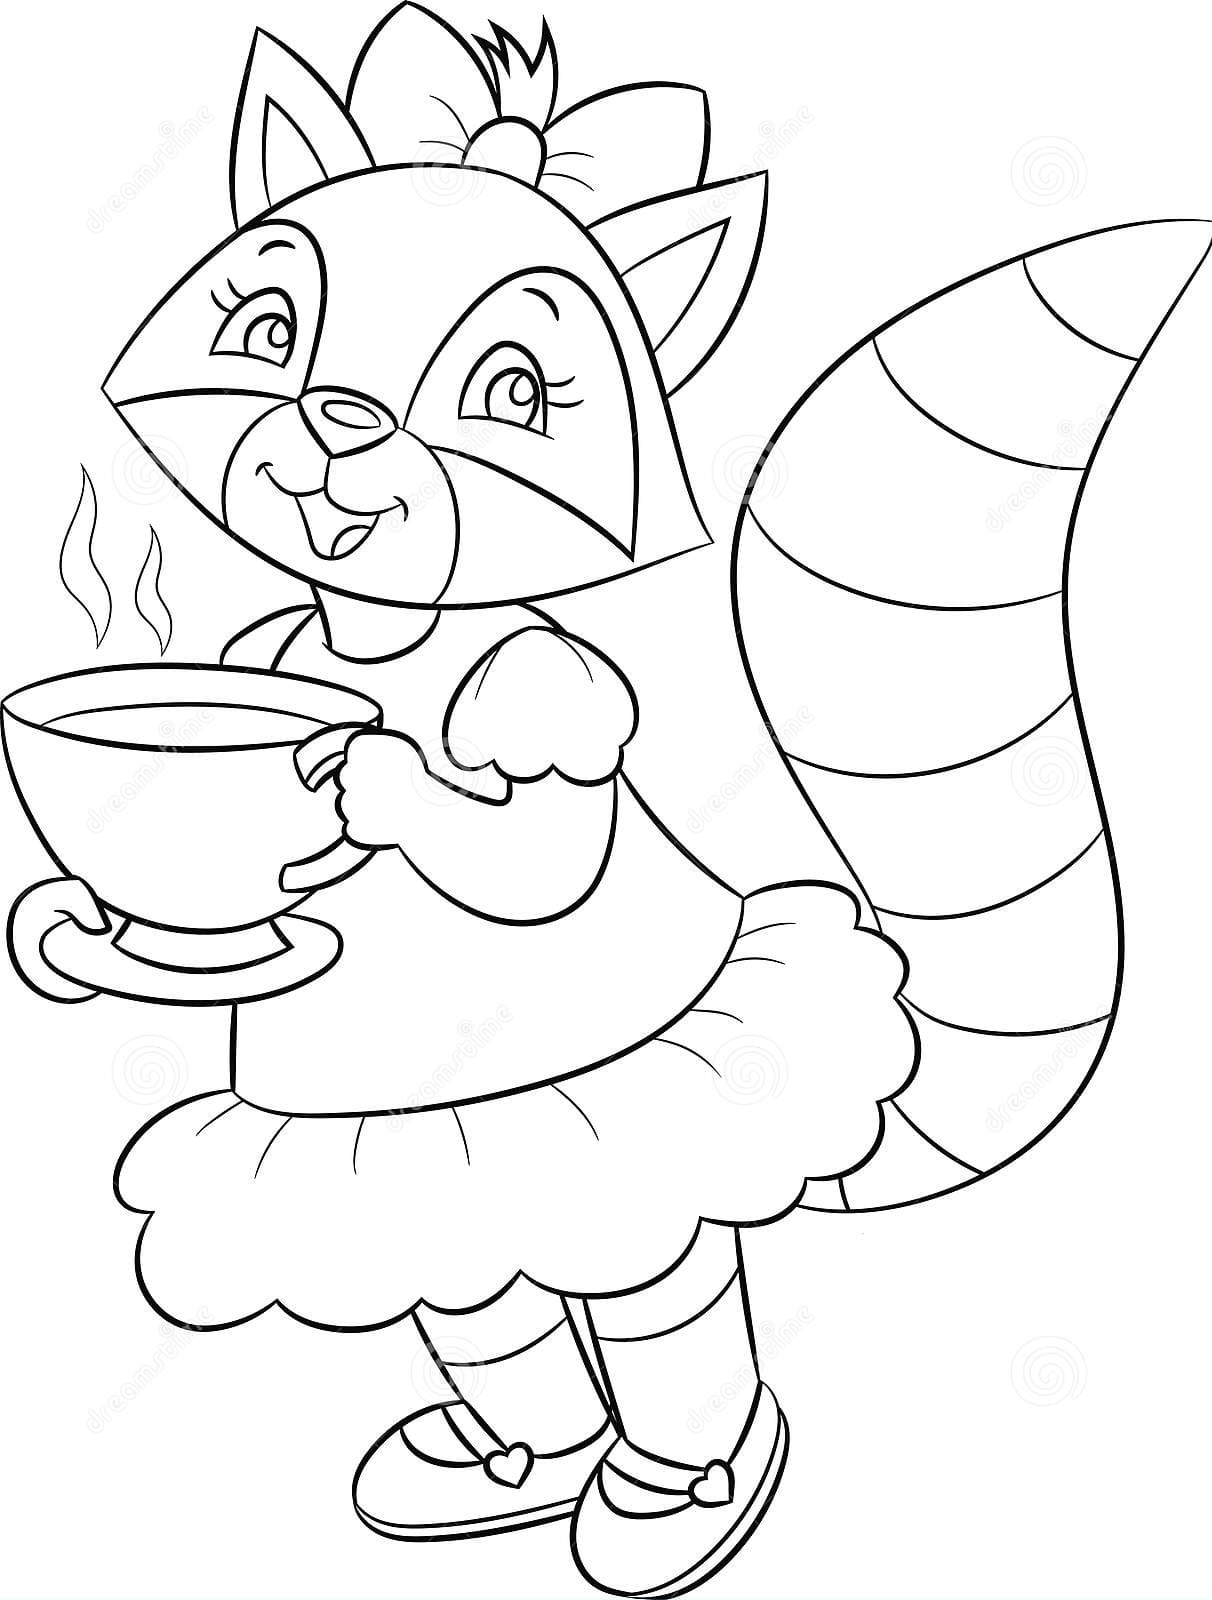 Cute Little Girl Raccoon Coloring Page